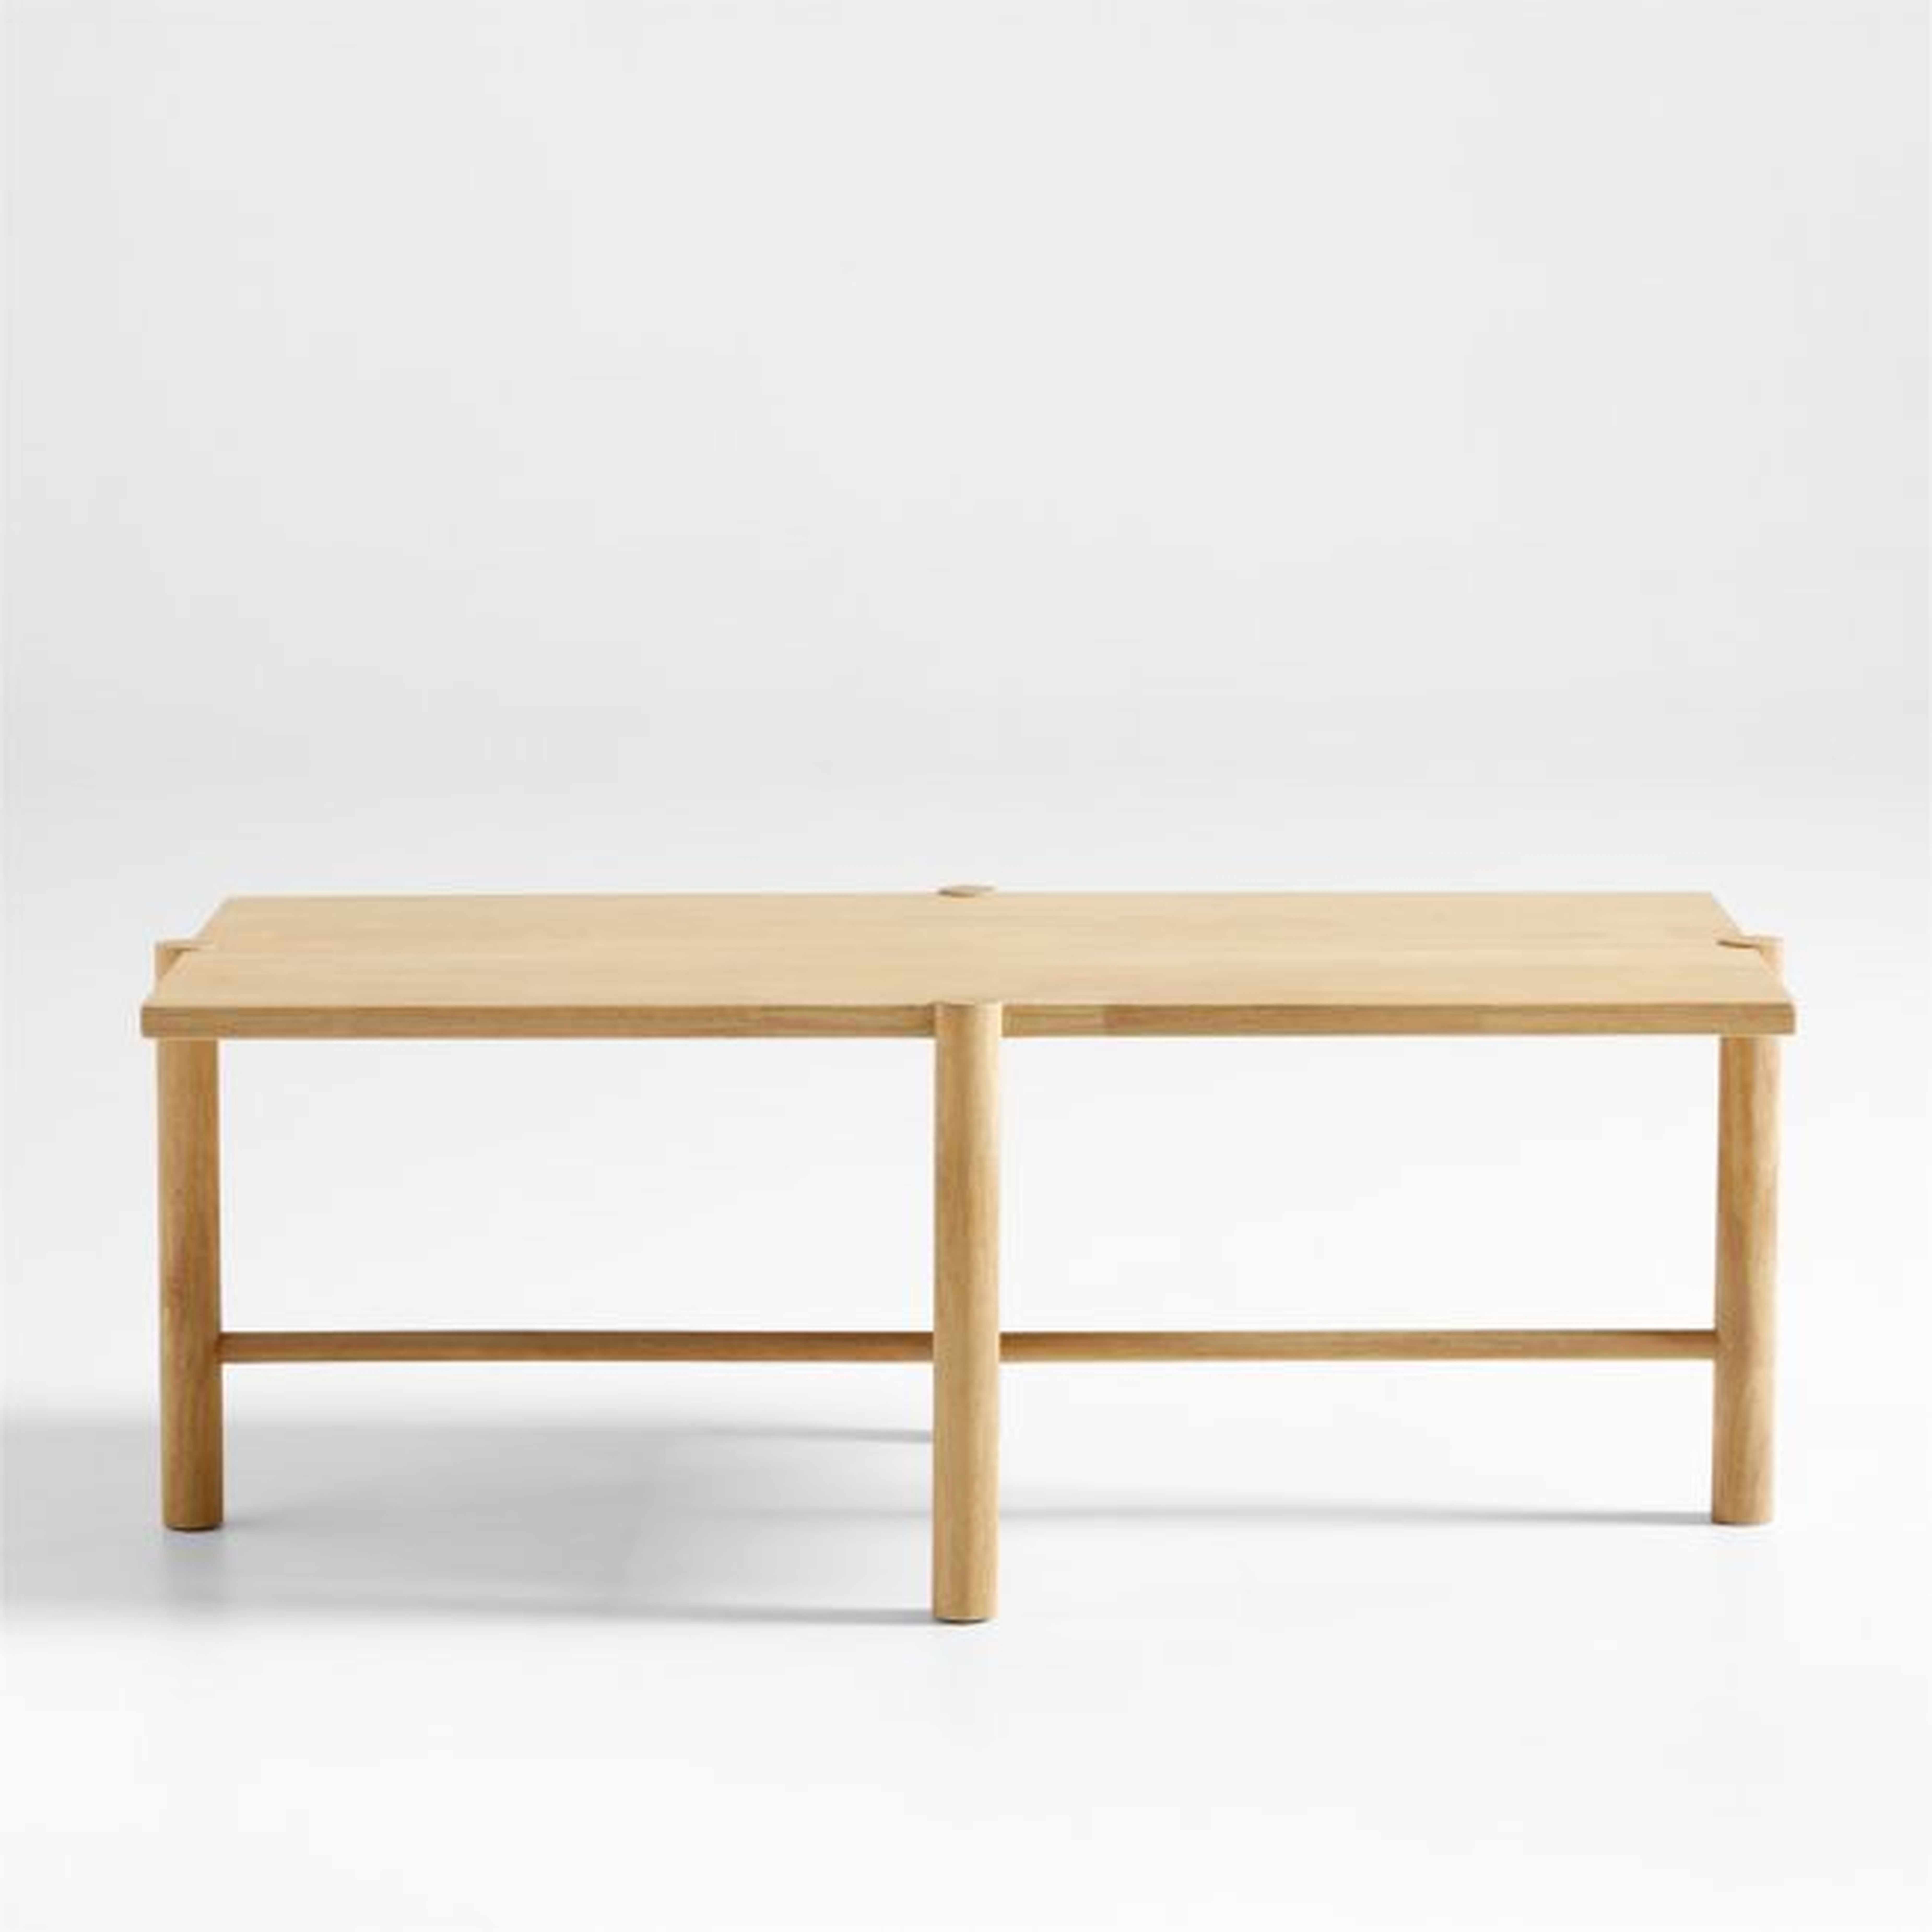 Jo Rectangular Wood Coffee Table - Crate and Barrel